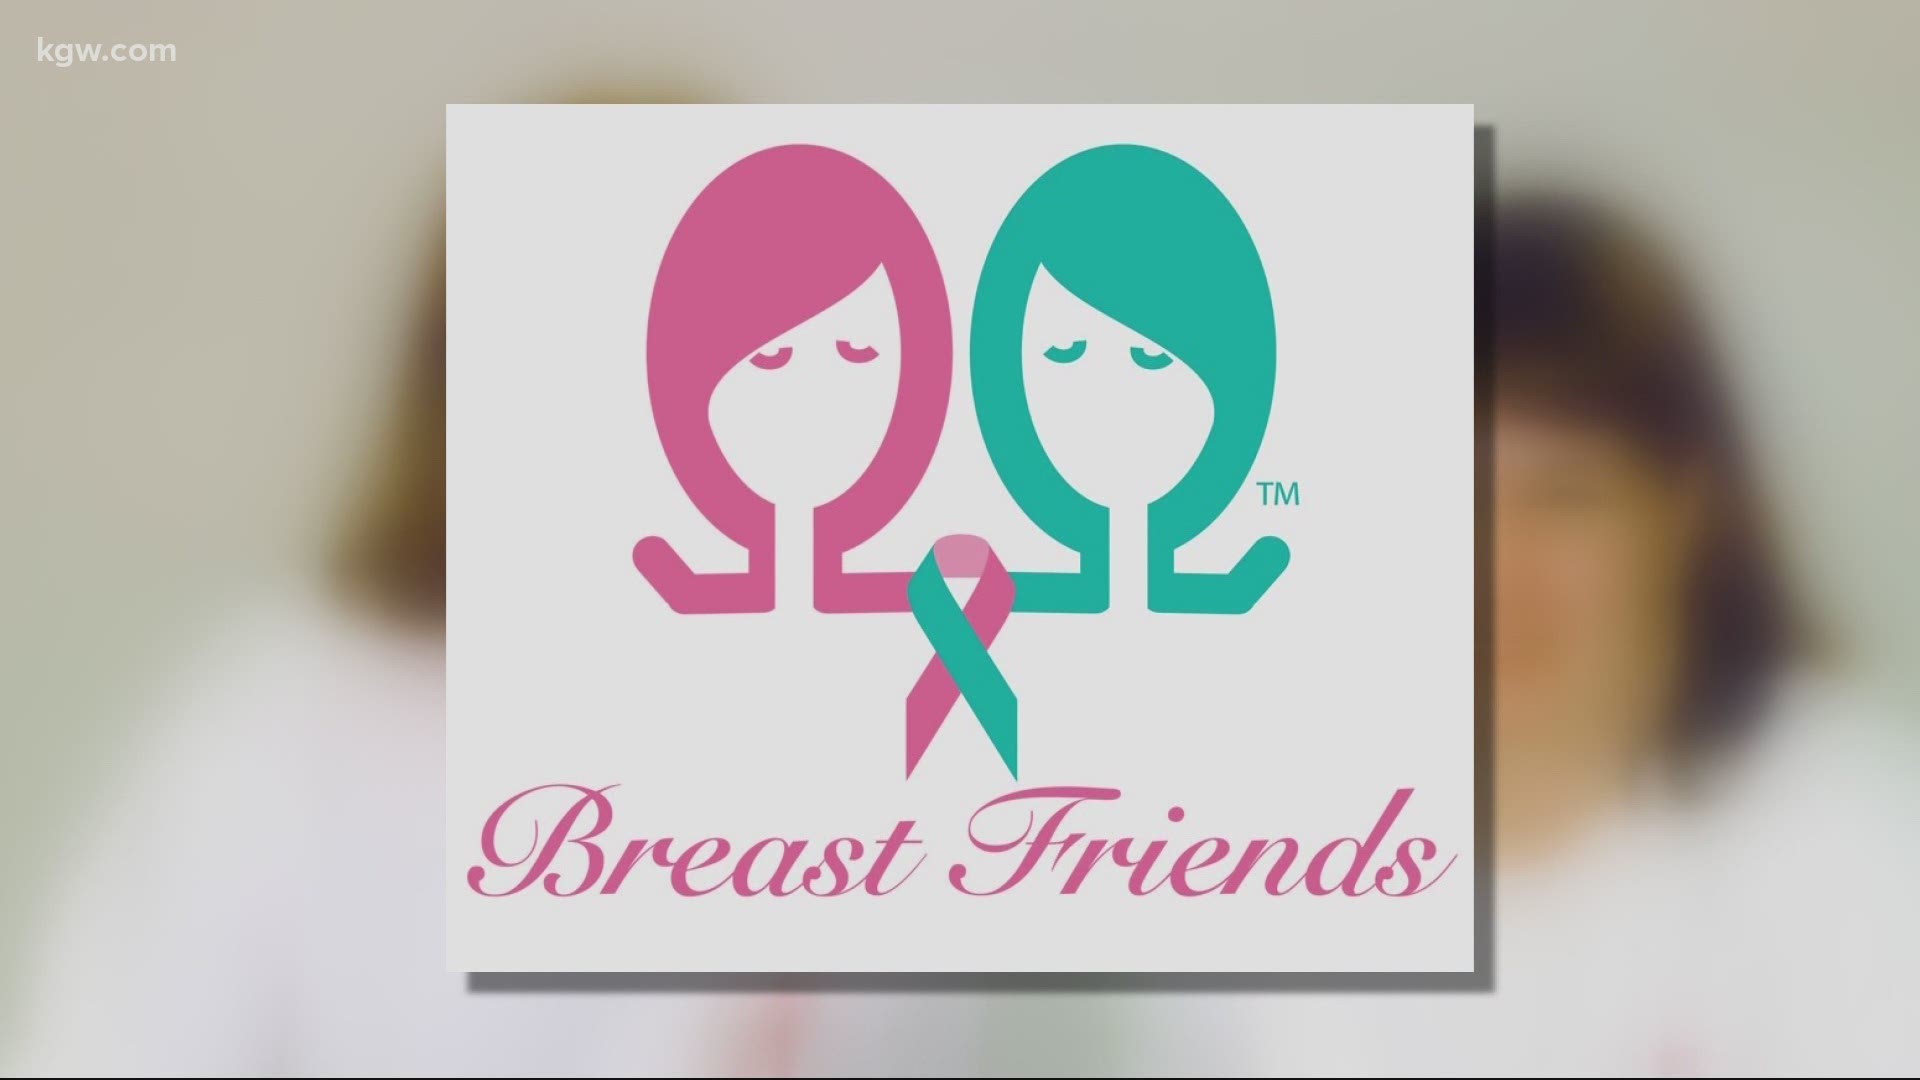 Breast Friends has supported Oregon women battling breast cancer for the past 20 years. Now, they’re turning to the community to help them continue their mission.